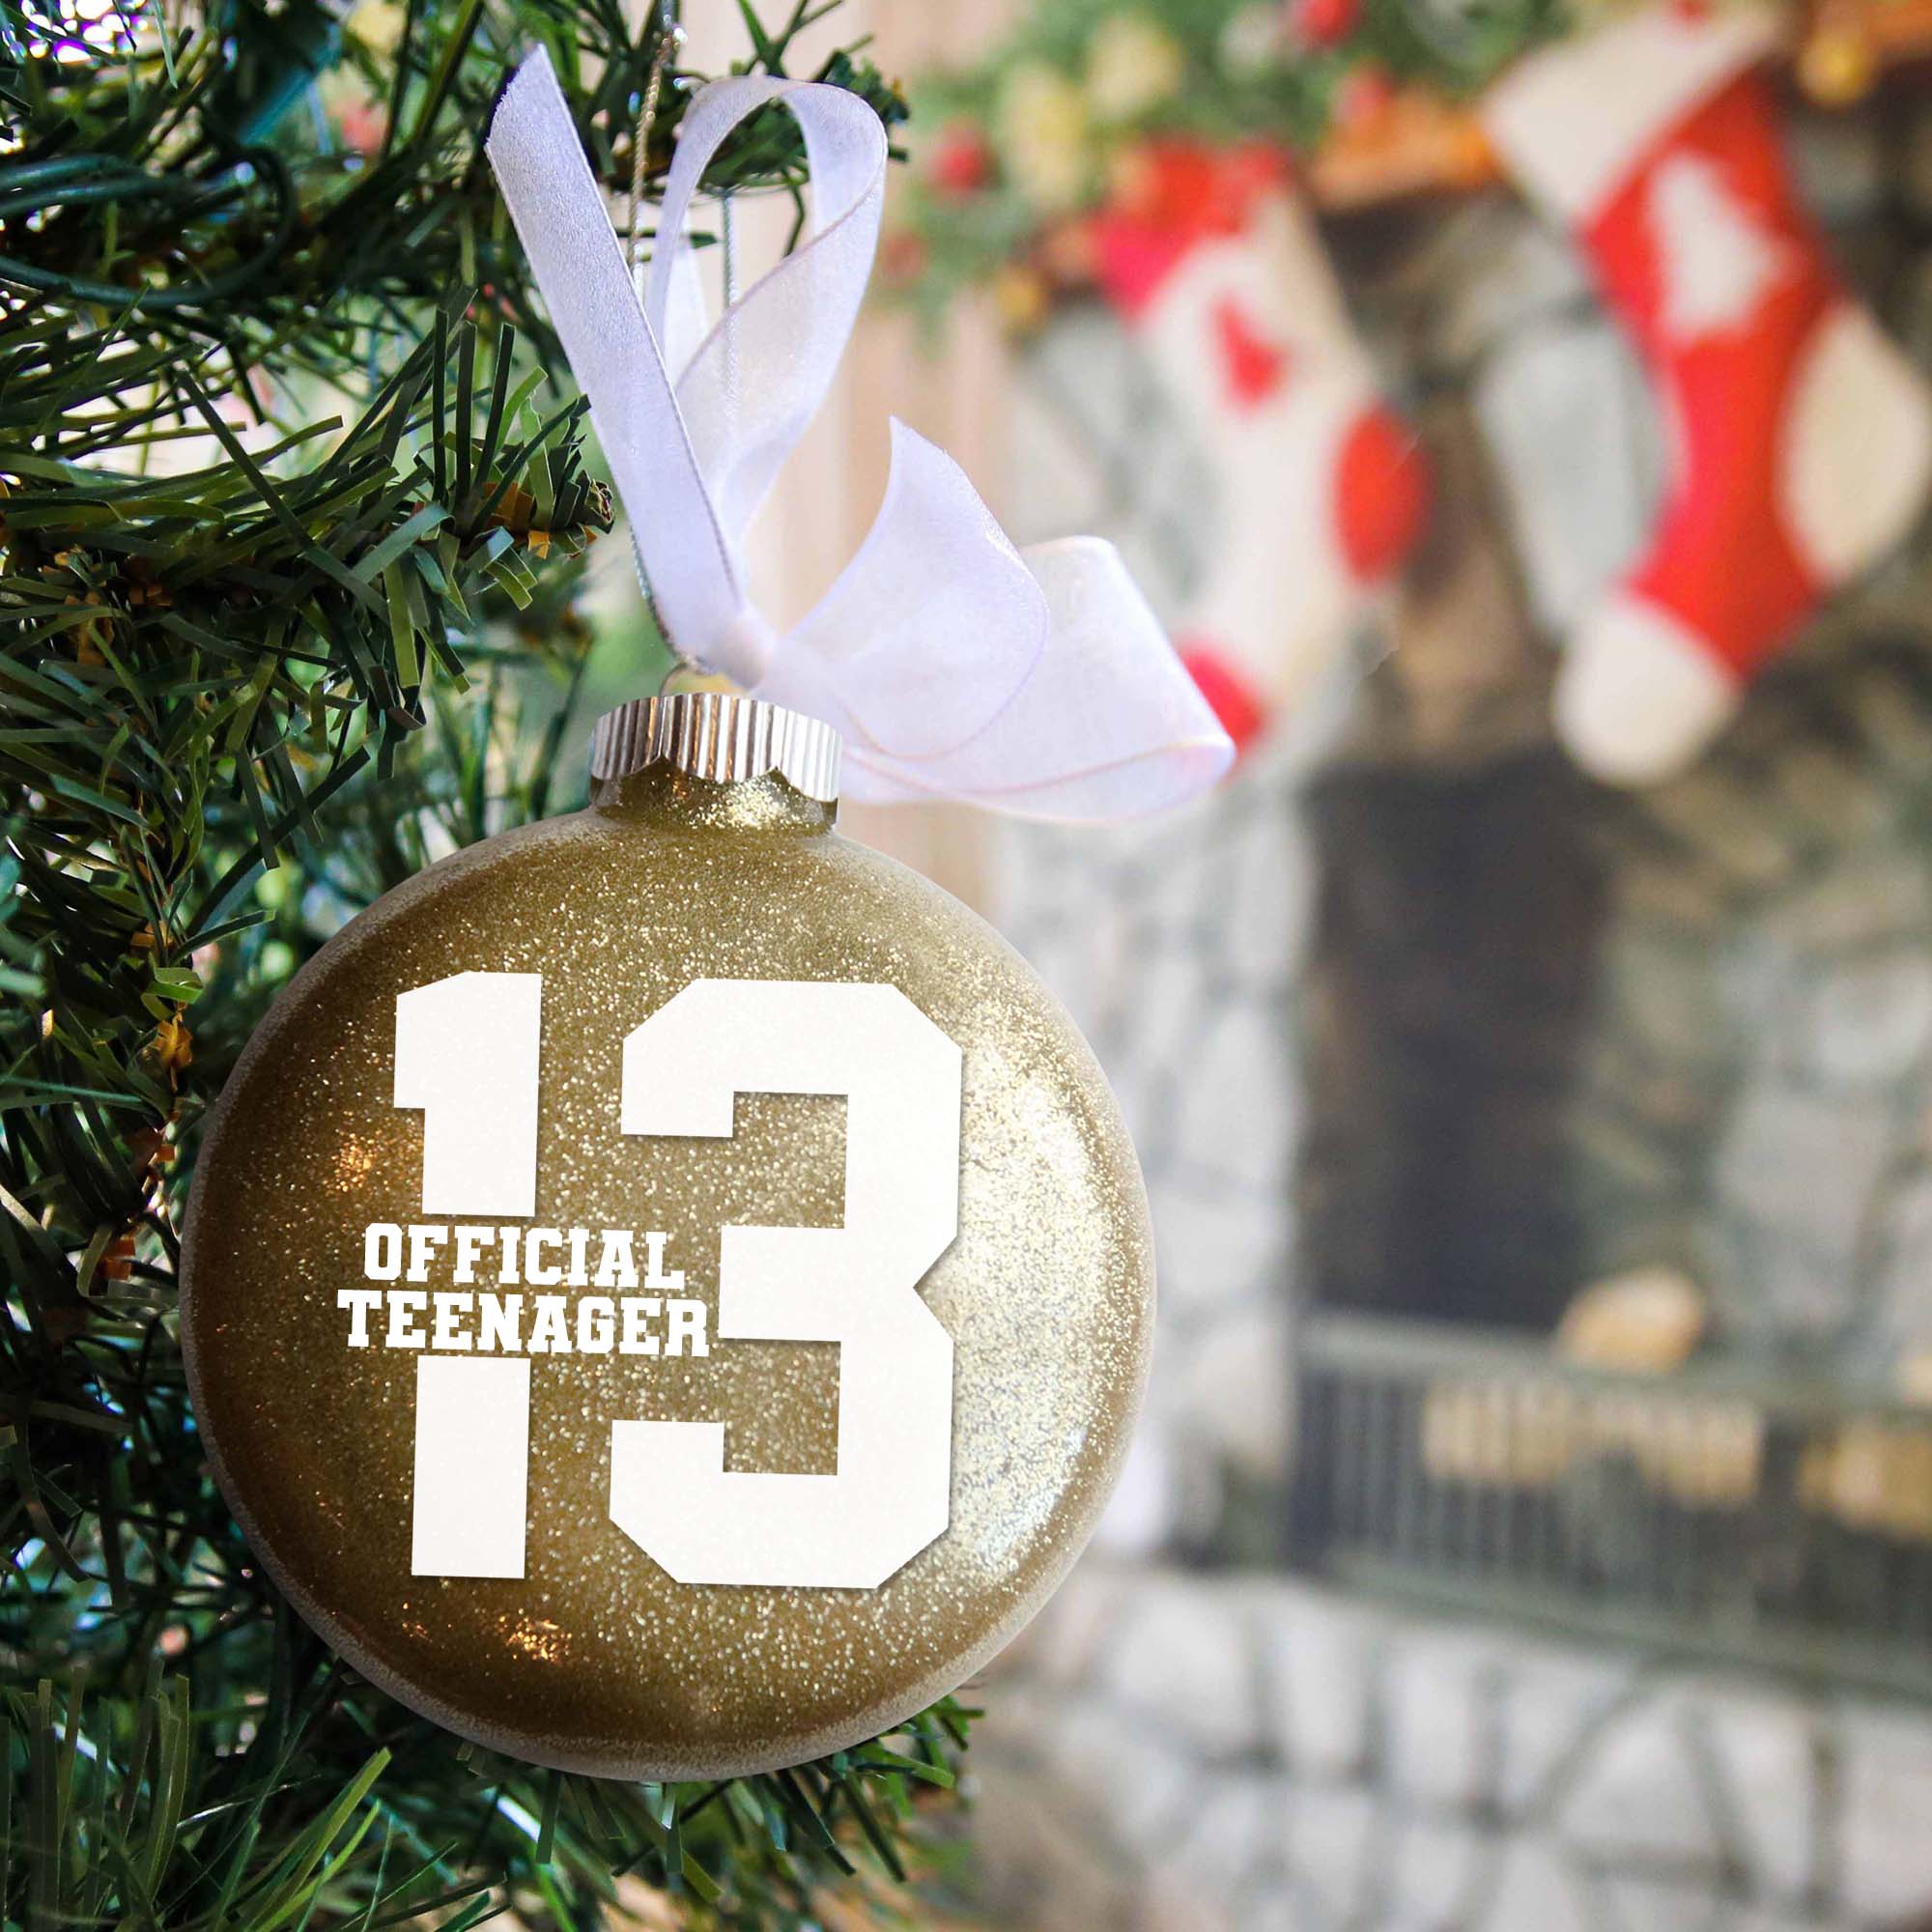 13 Official Teenager Birthday Ornament in gold glitter hanging in a Christmas tree 